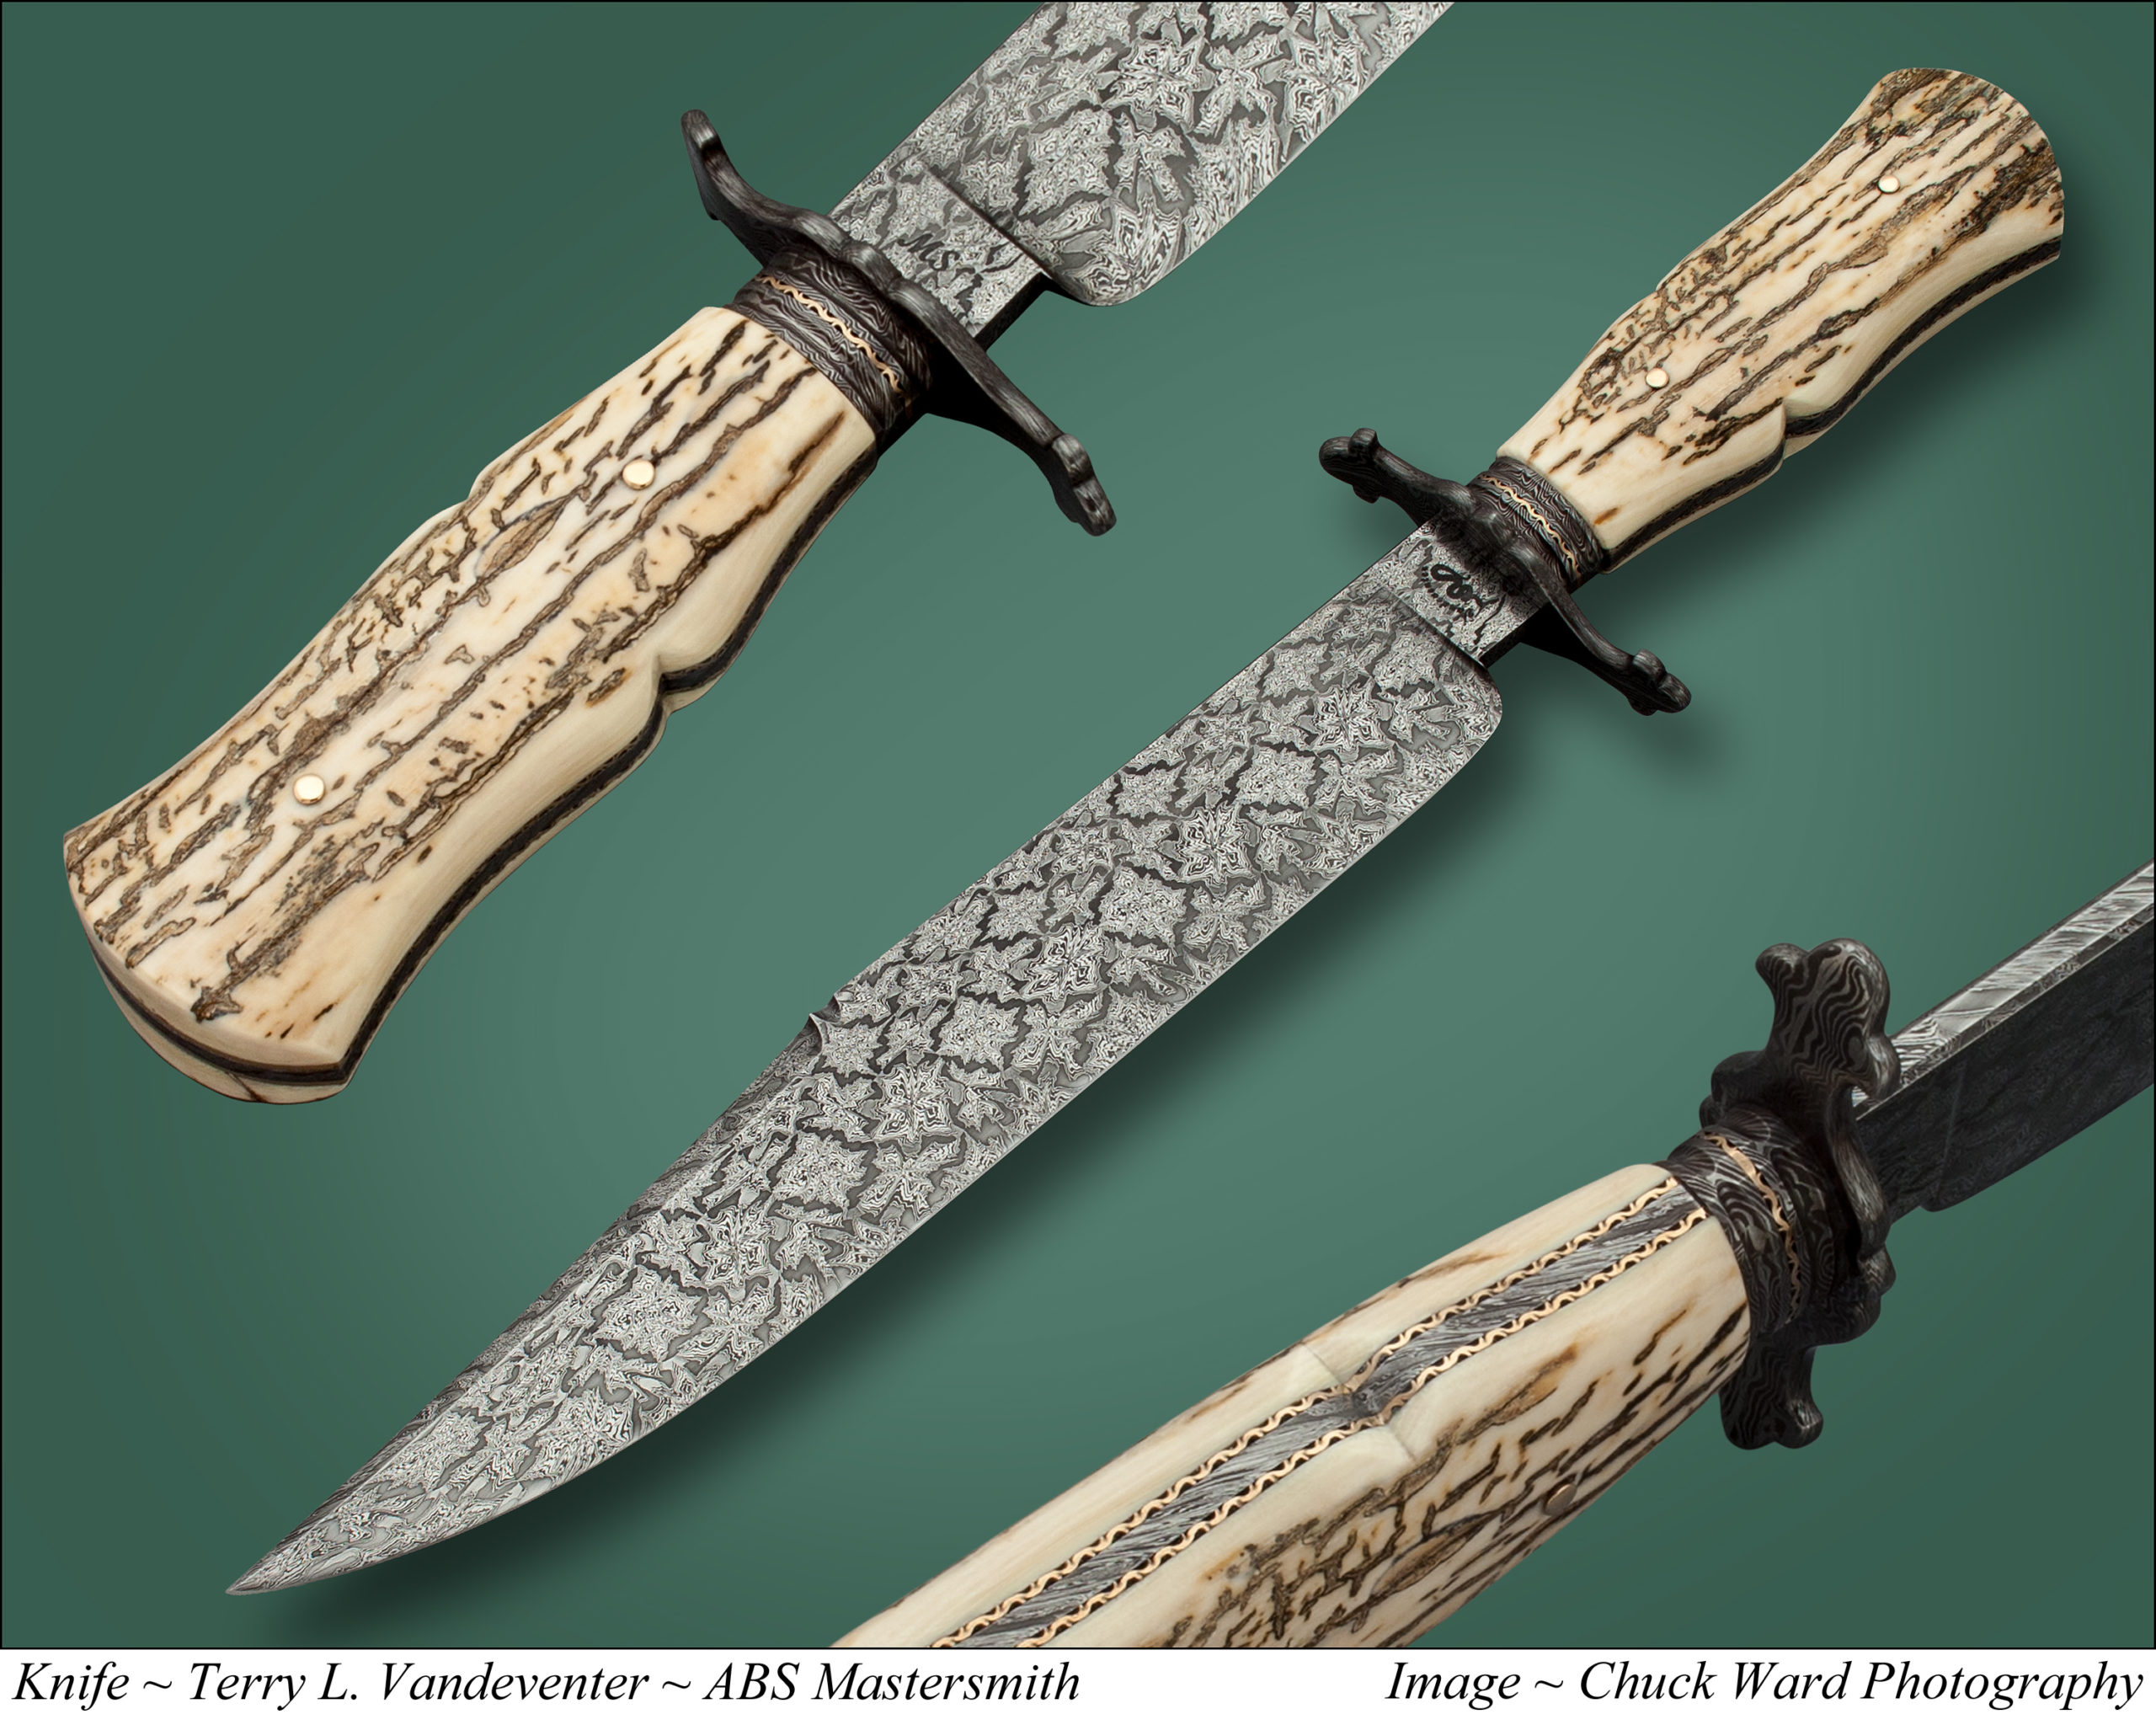 Damascus Steel: What Is It and How Is It Made?